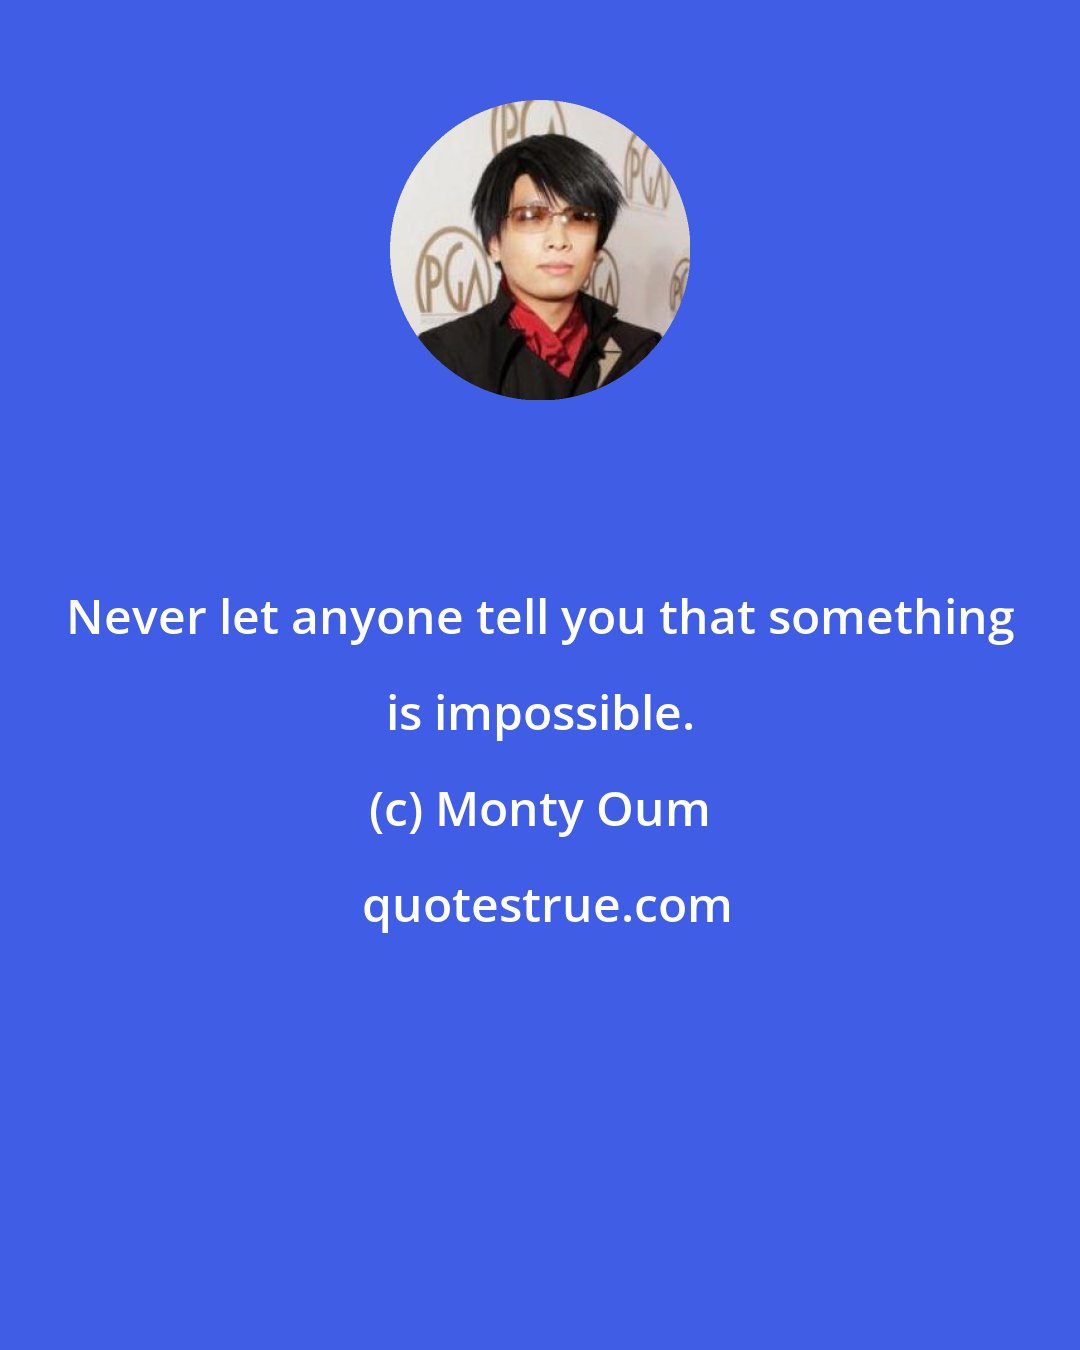 Monty Oum: Never let anyone tell you that something is impossible.